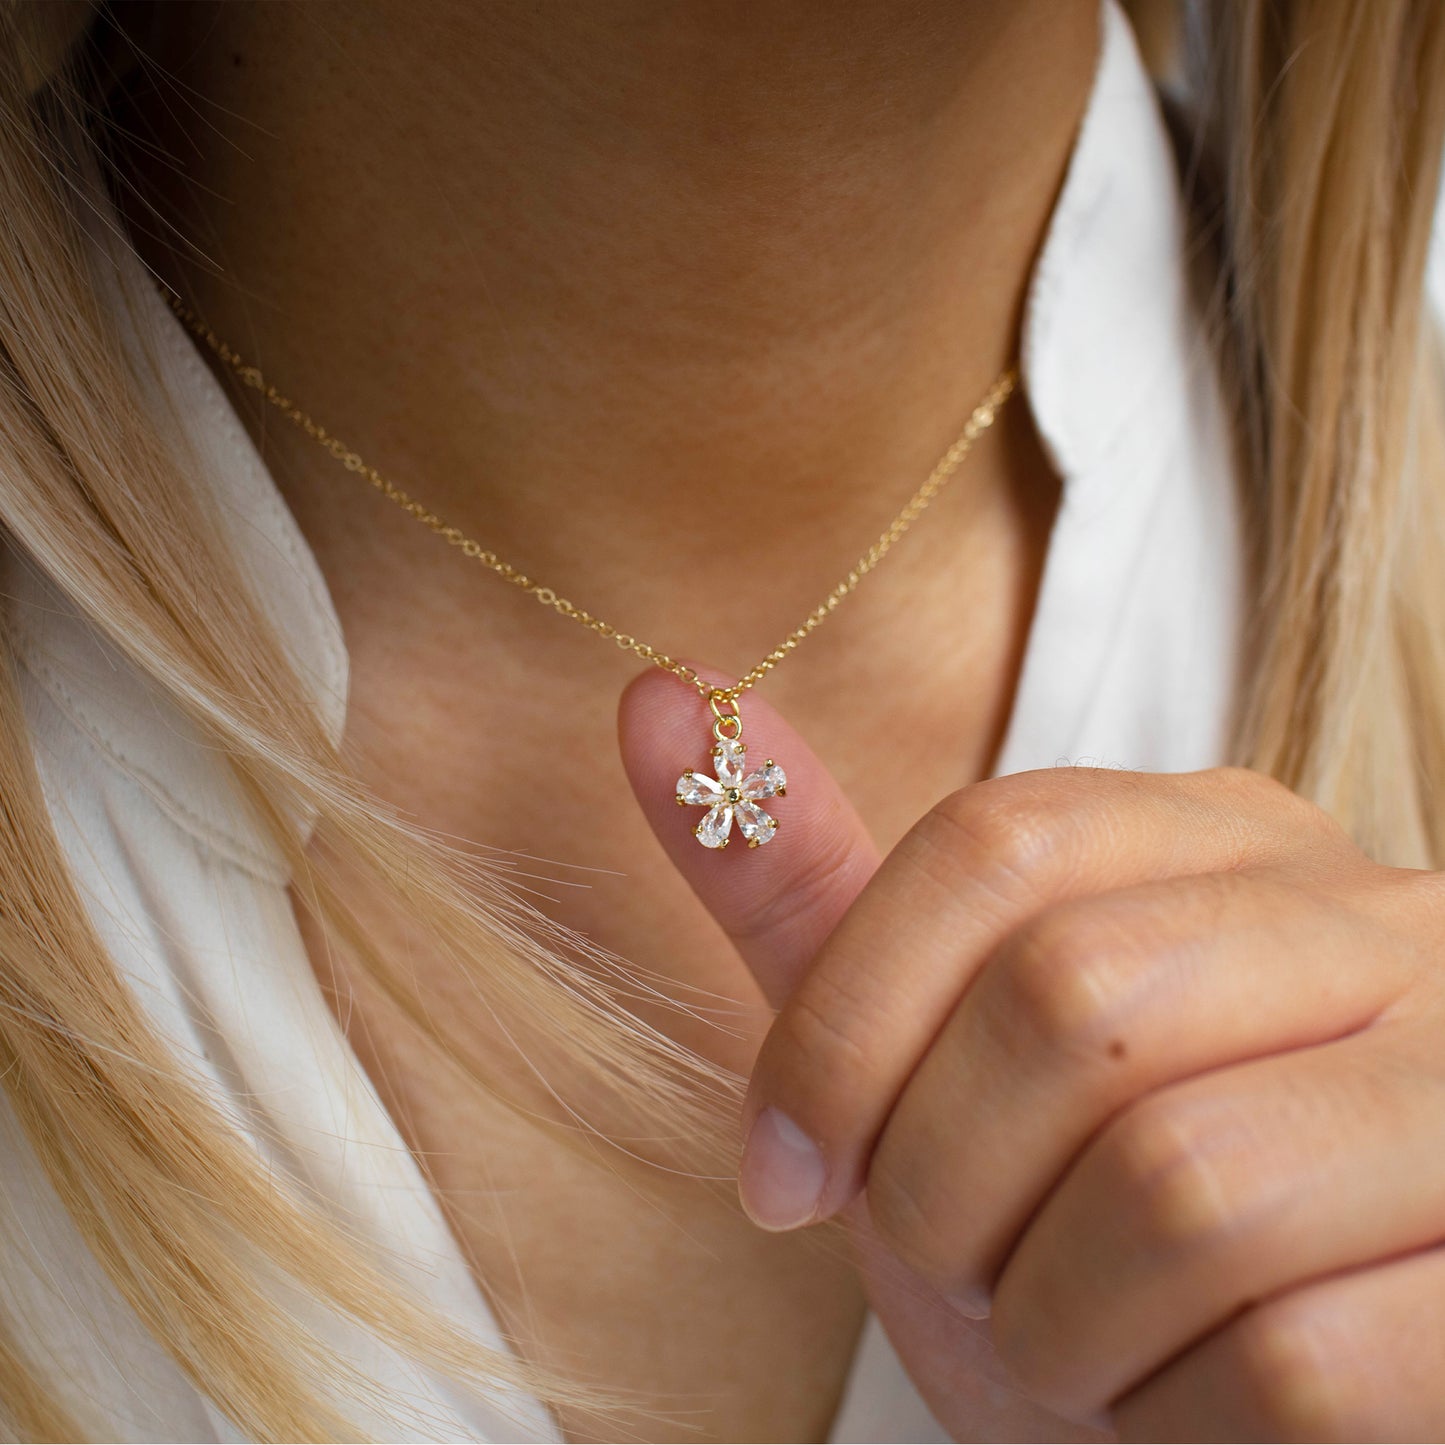 This photo features a thin chain necklace made of 14K gold-plated sterling silver, paired with a zircon Flower charm.